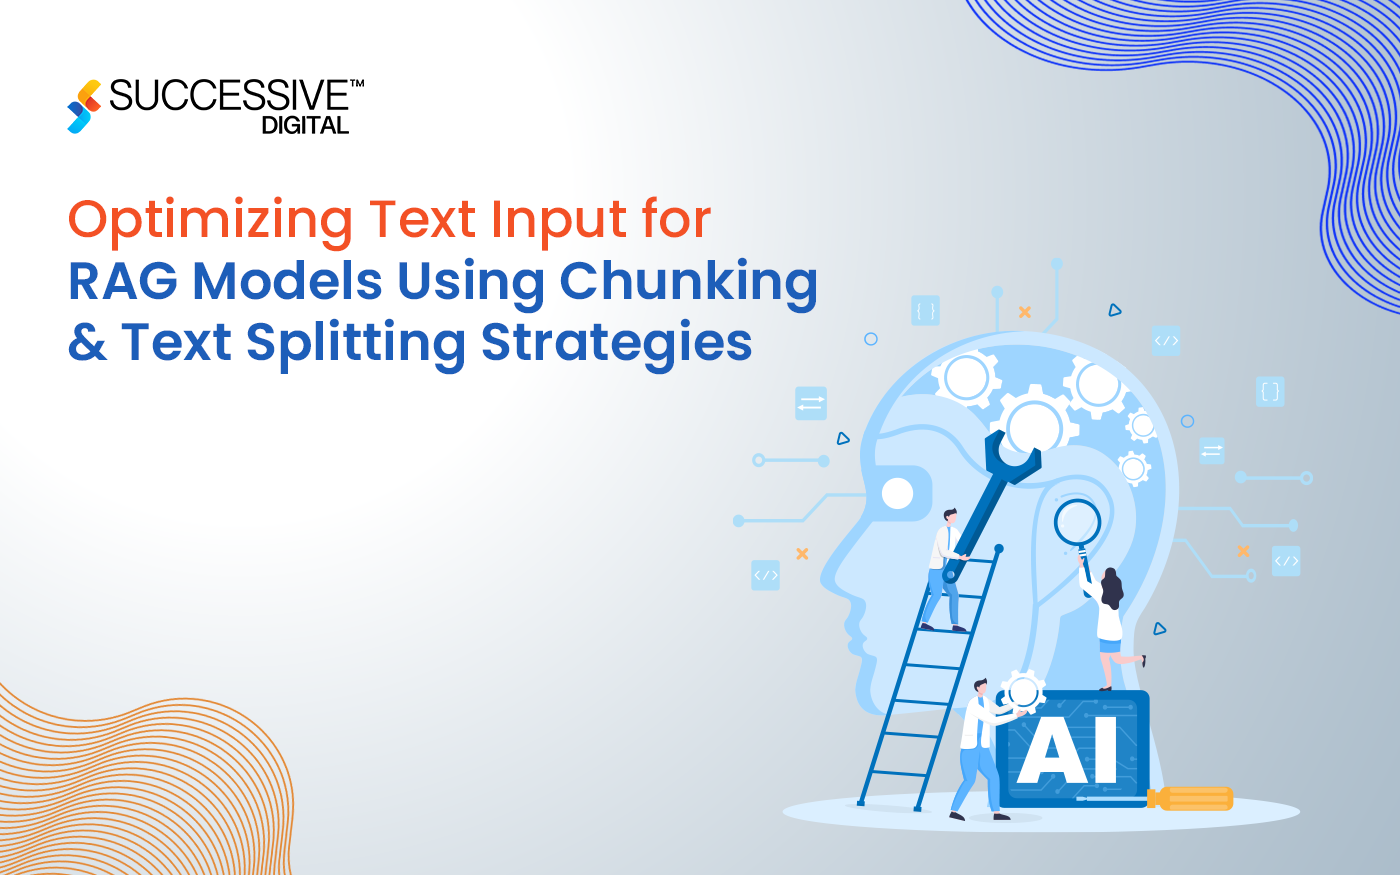 Optimizing Text Input for RAG Models Using Chunking and Text Splitting Strategies